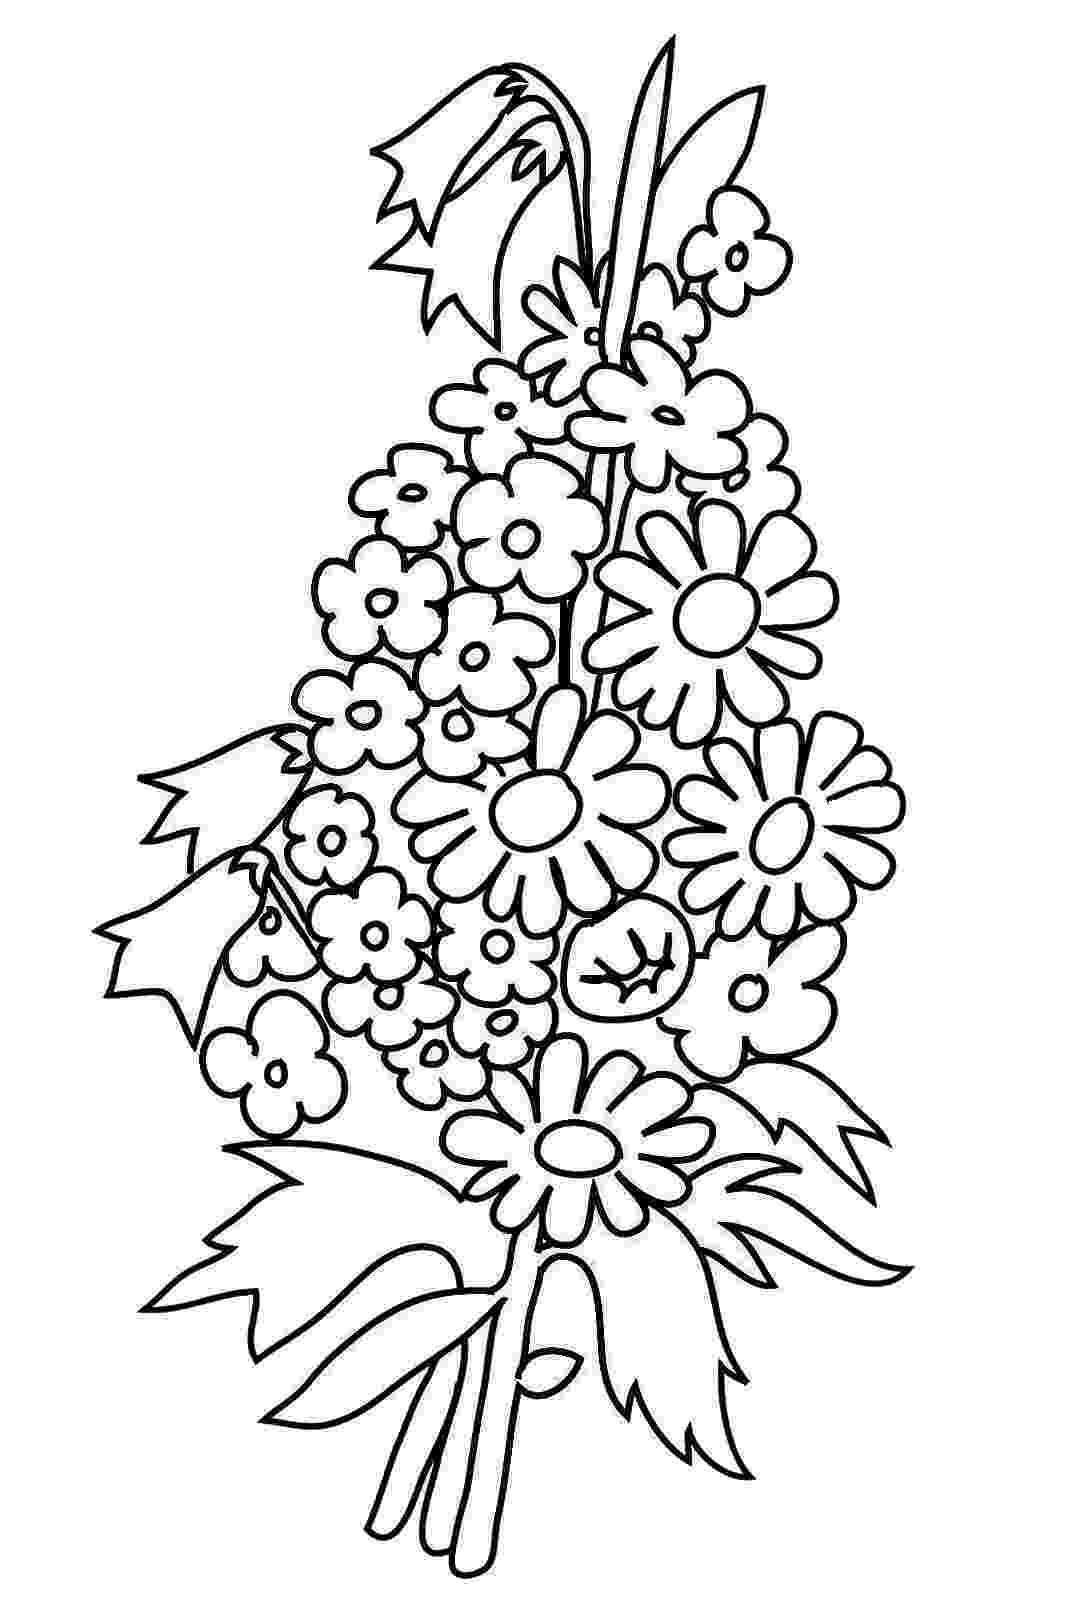 coloring images of flowers flower coloring pages images of coloring flowers 